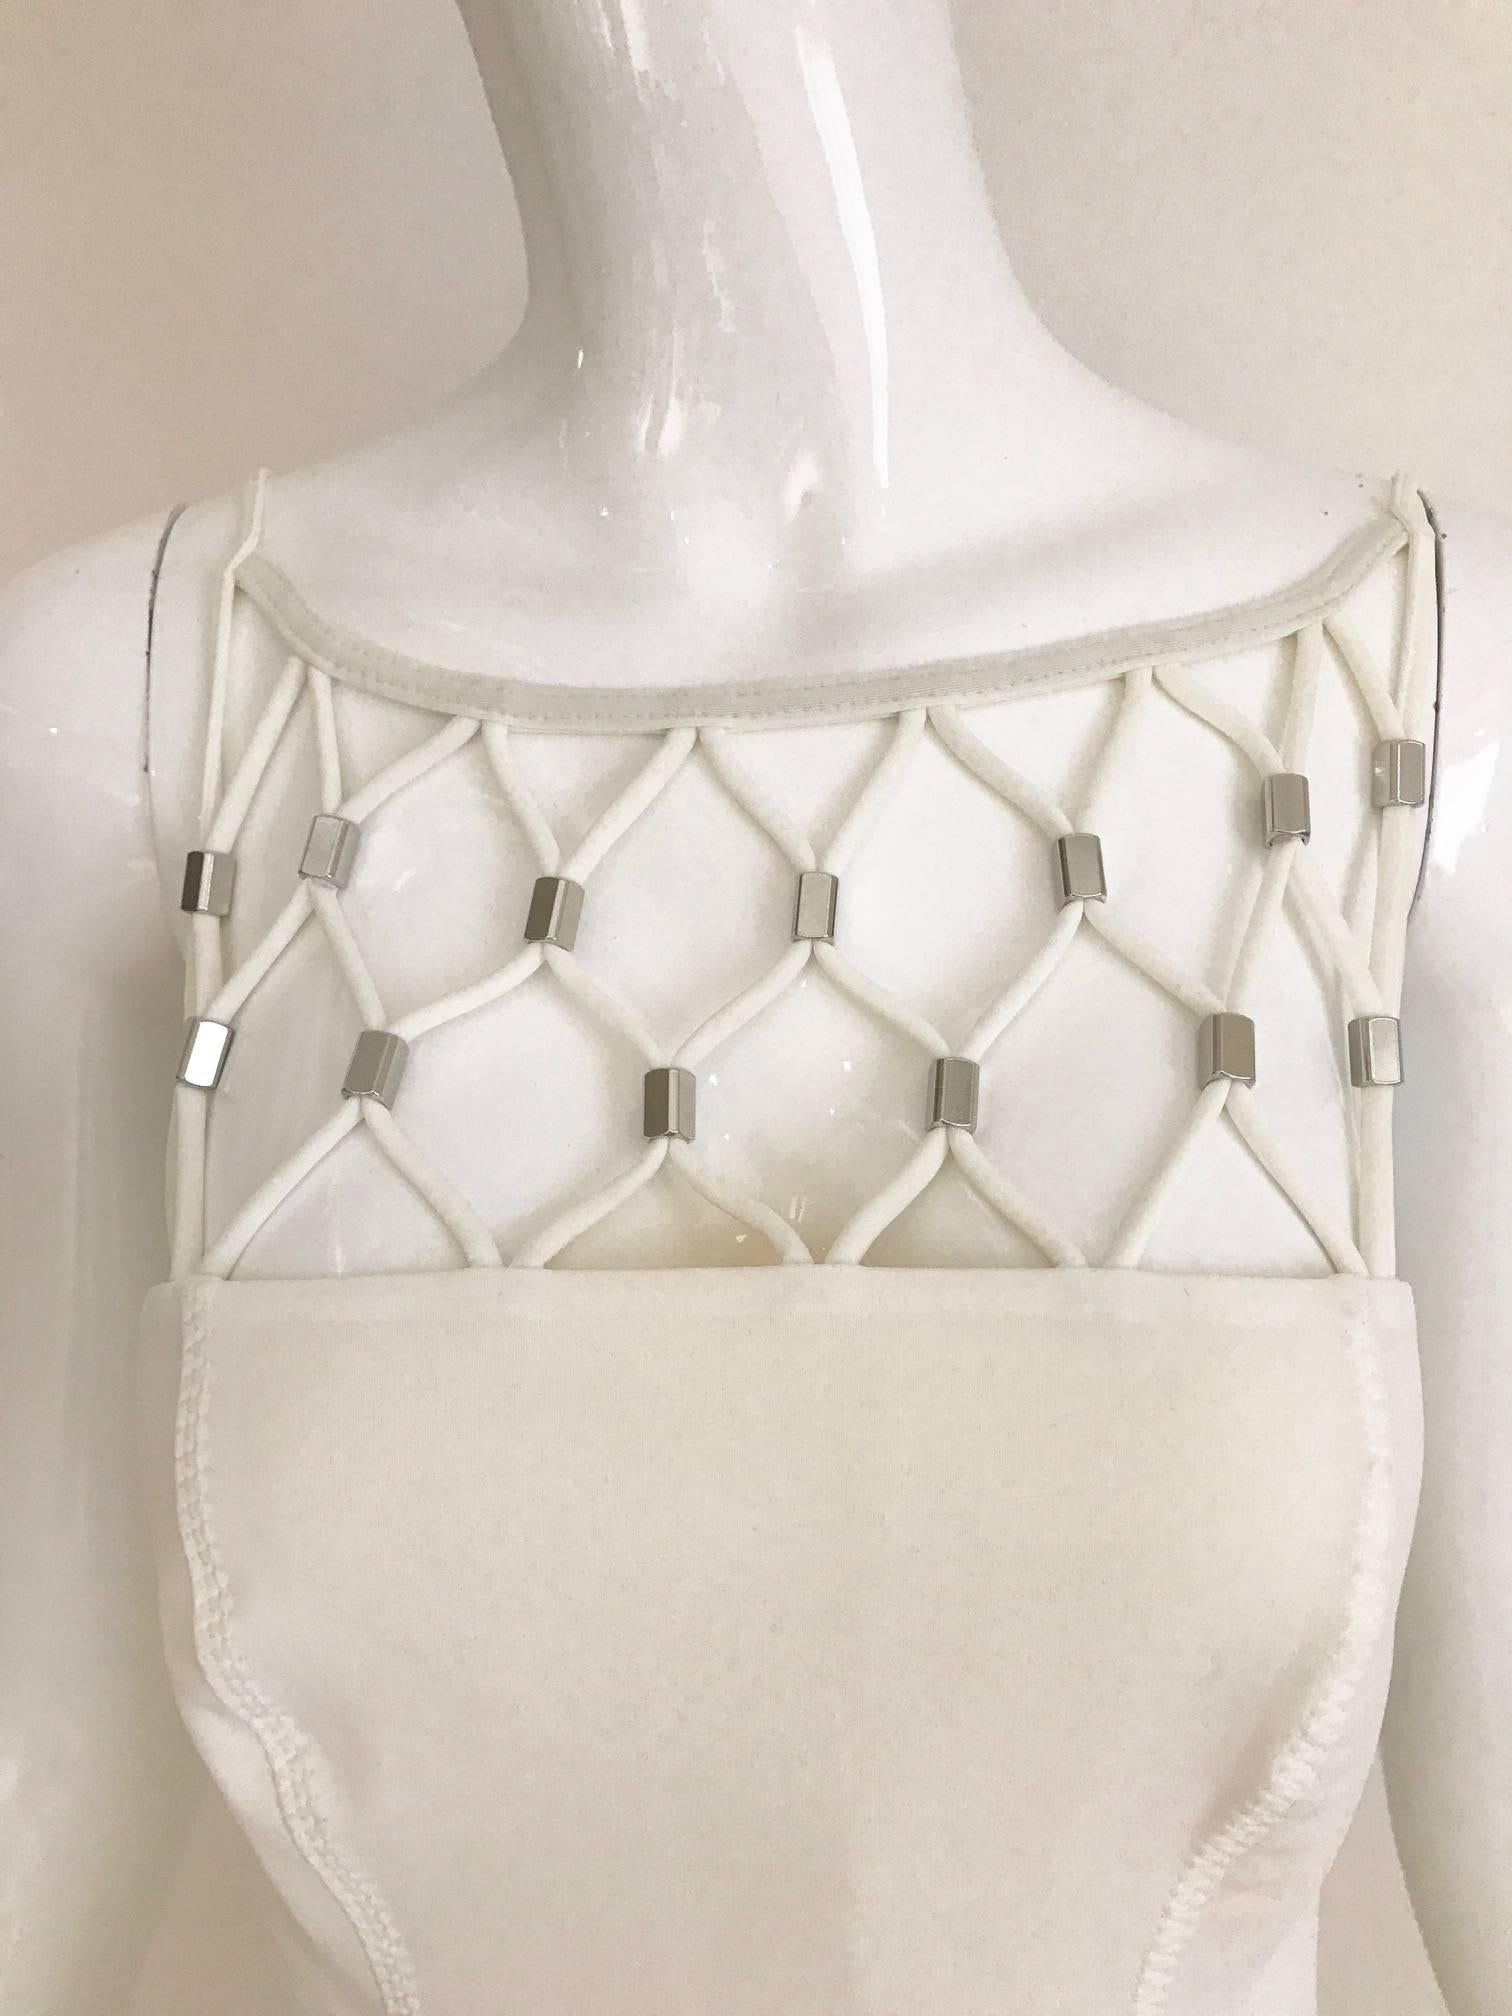 Never Worn Paco Rabanne White Lattice One Piece Bathing Suit. Bathing suit still has store tag.
Marked Size 40.  Fit size 4/6
Bust: 32 inch - 34 inch
Waist: 28 inch - 30 inch
Hip: 34 inch - 36 inch
